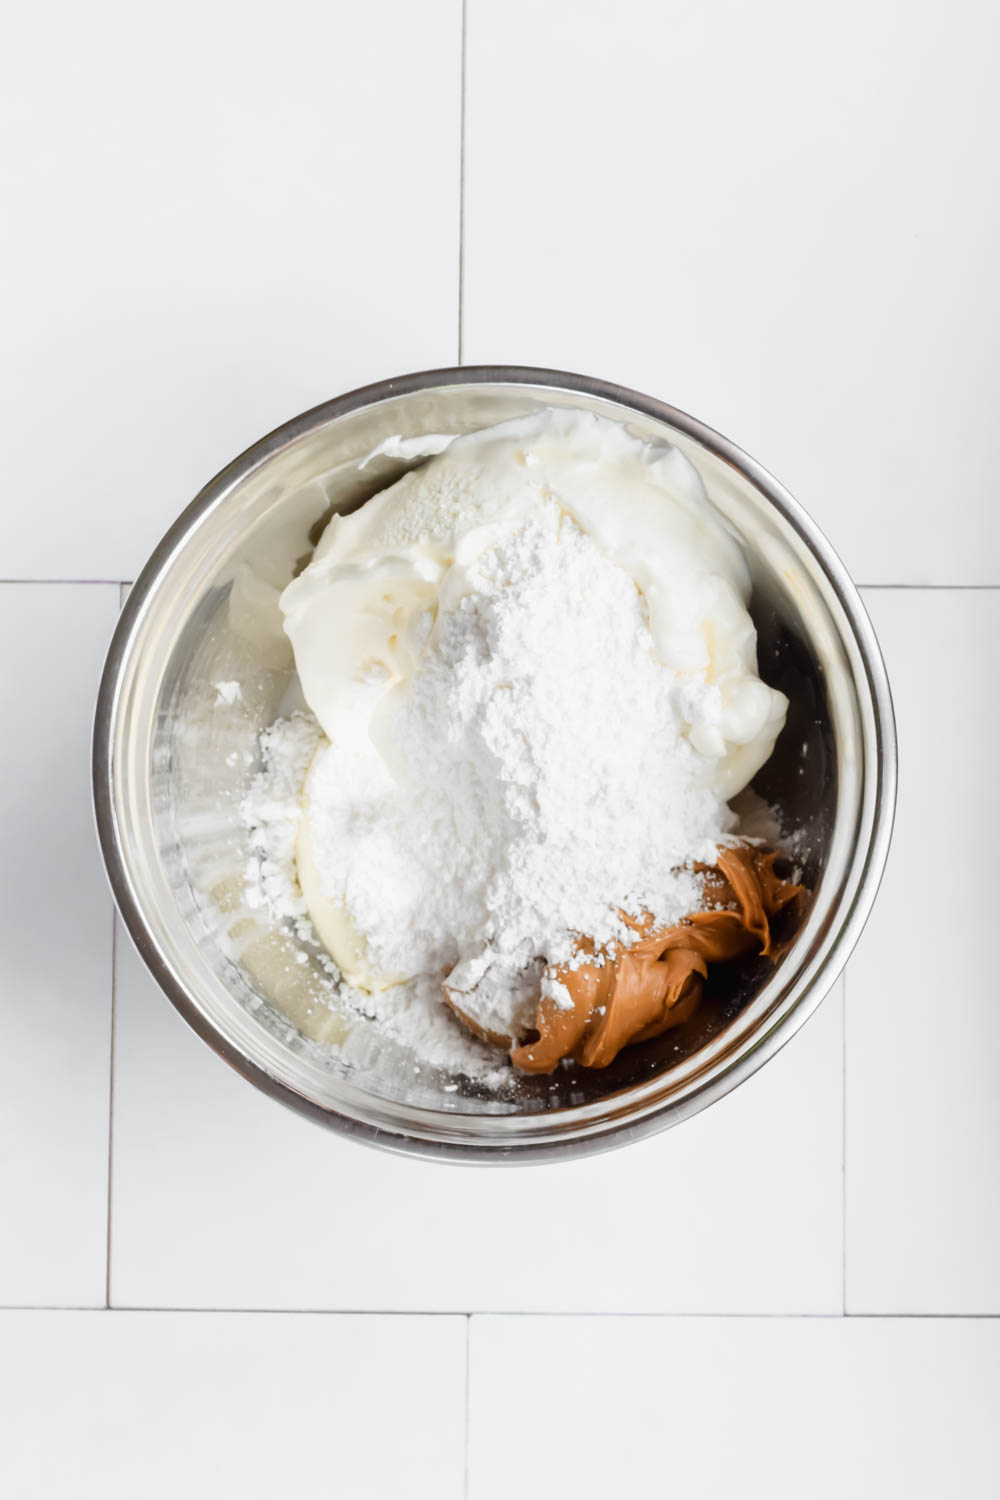 peanut butter, powdered sugar, and cream cheese block and yogurt in silver mixing bowl on white background.